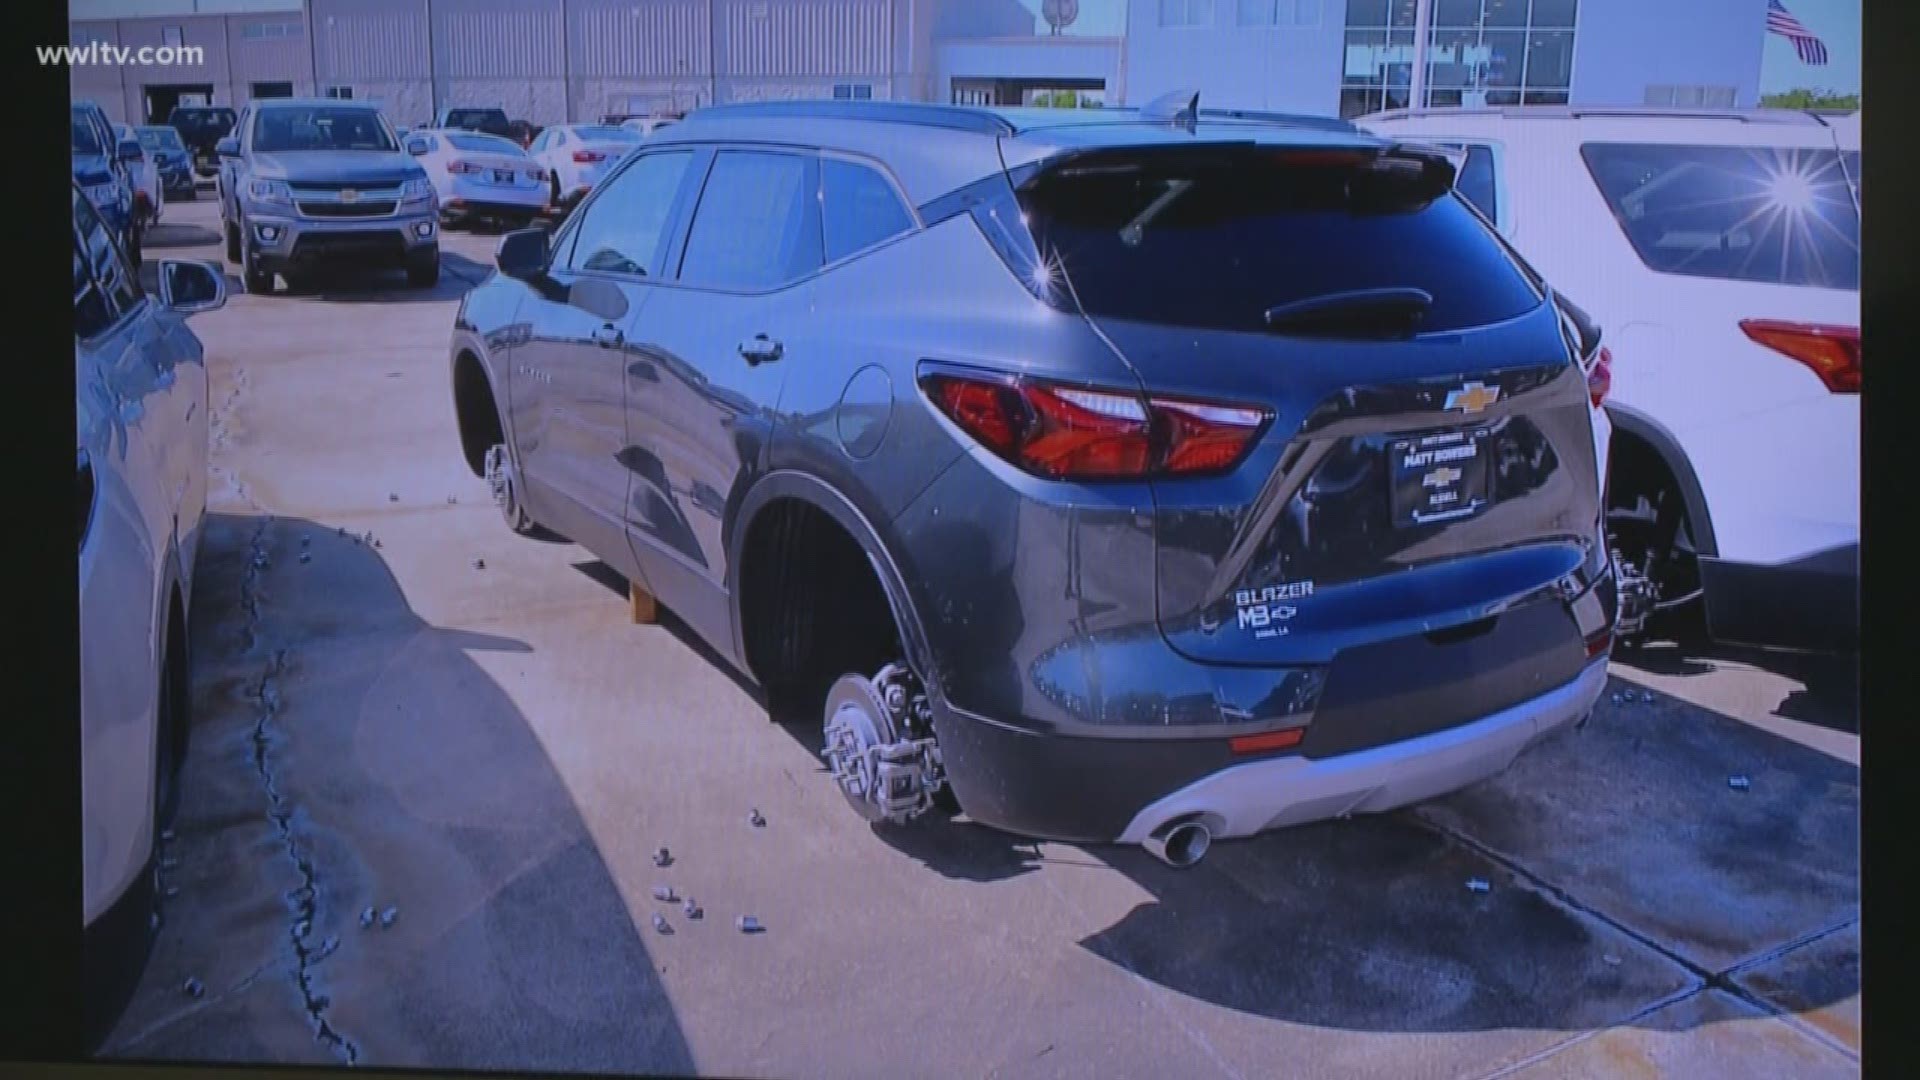 Slidell Police believe a professional theft ring is behind the theft of $120,000 worth of tires and rims from brand new cars on the lot of a Slidell dealership. Police said the thieves, who he believes committed similar crimes in Texas and Oklahoma, defeated locks, alarms and surveillance cameras to perpetrate the heist.